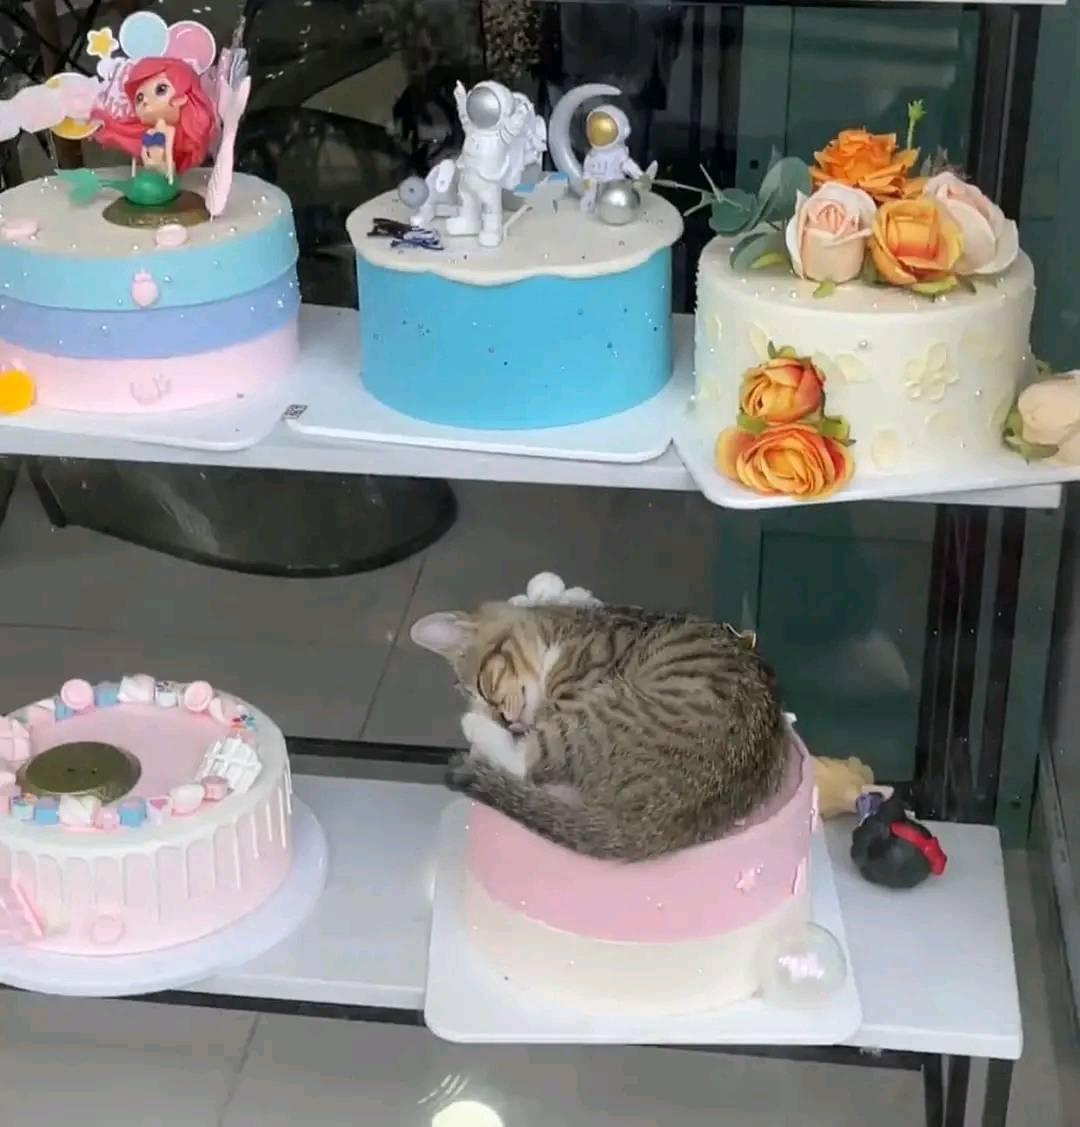 how+much+for+the+cake+with+the+cat+topper%3F